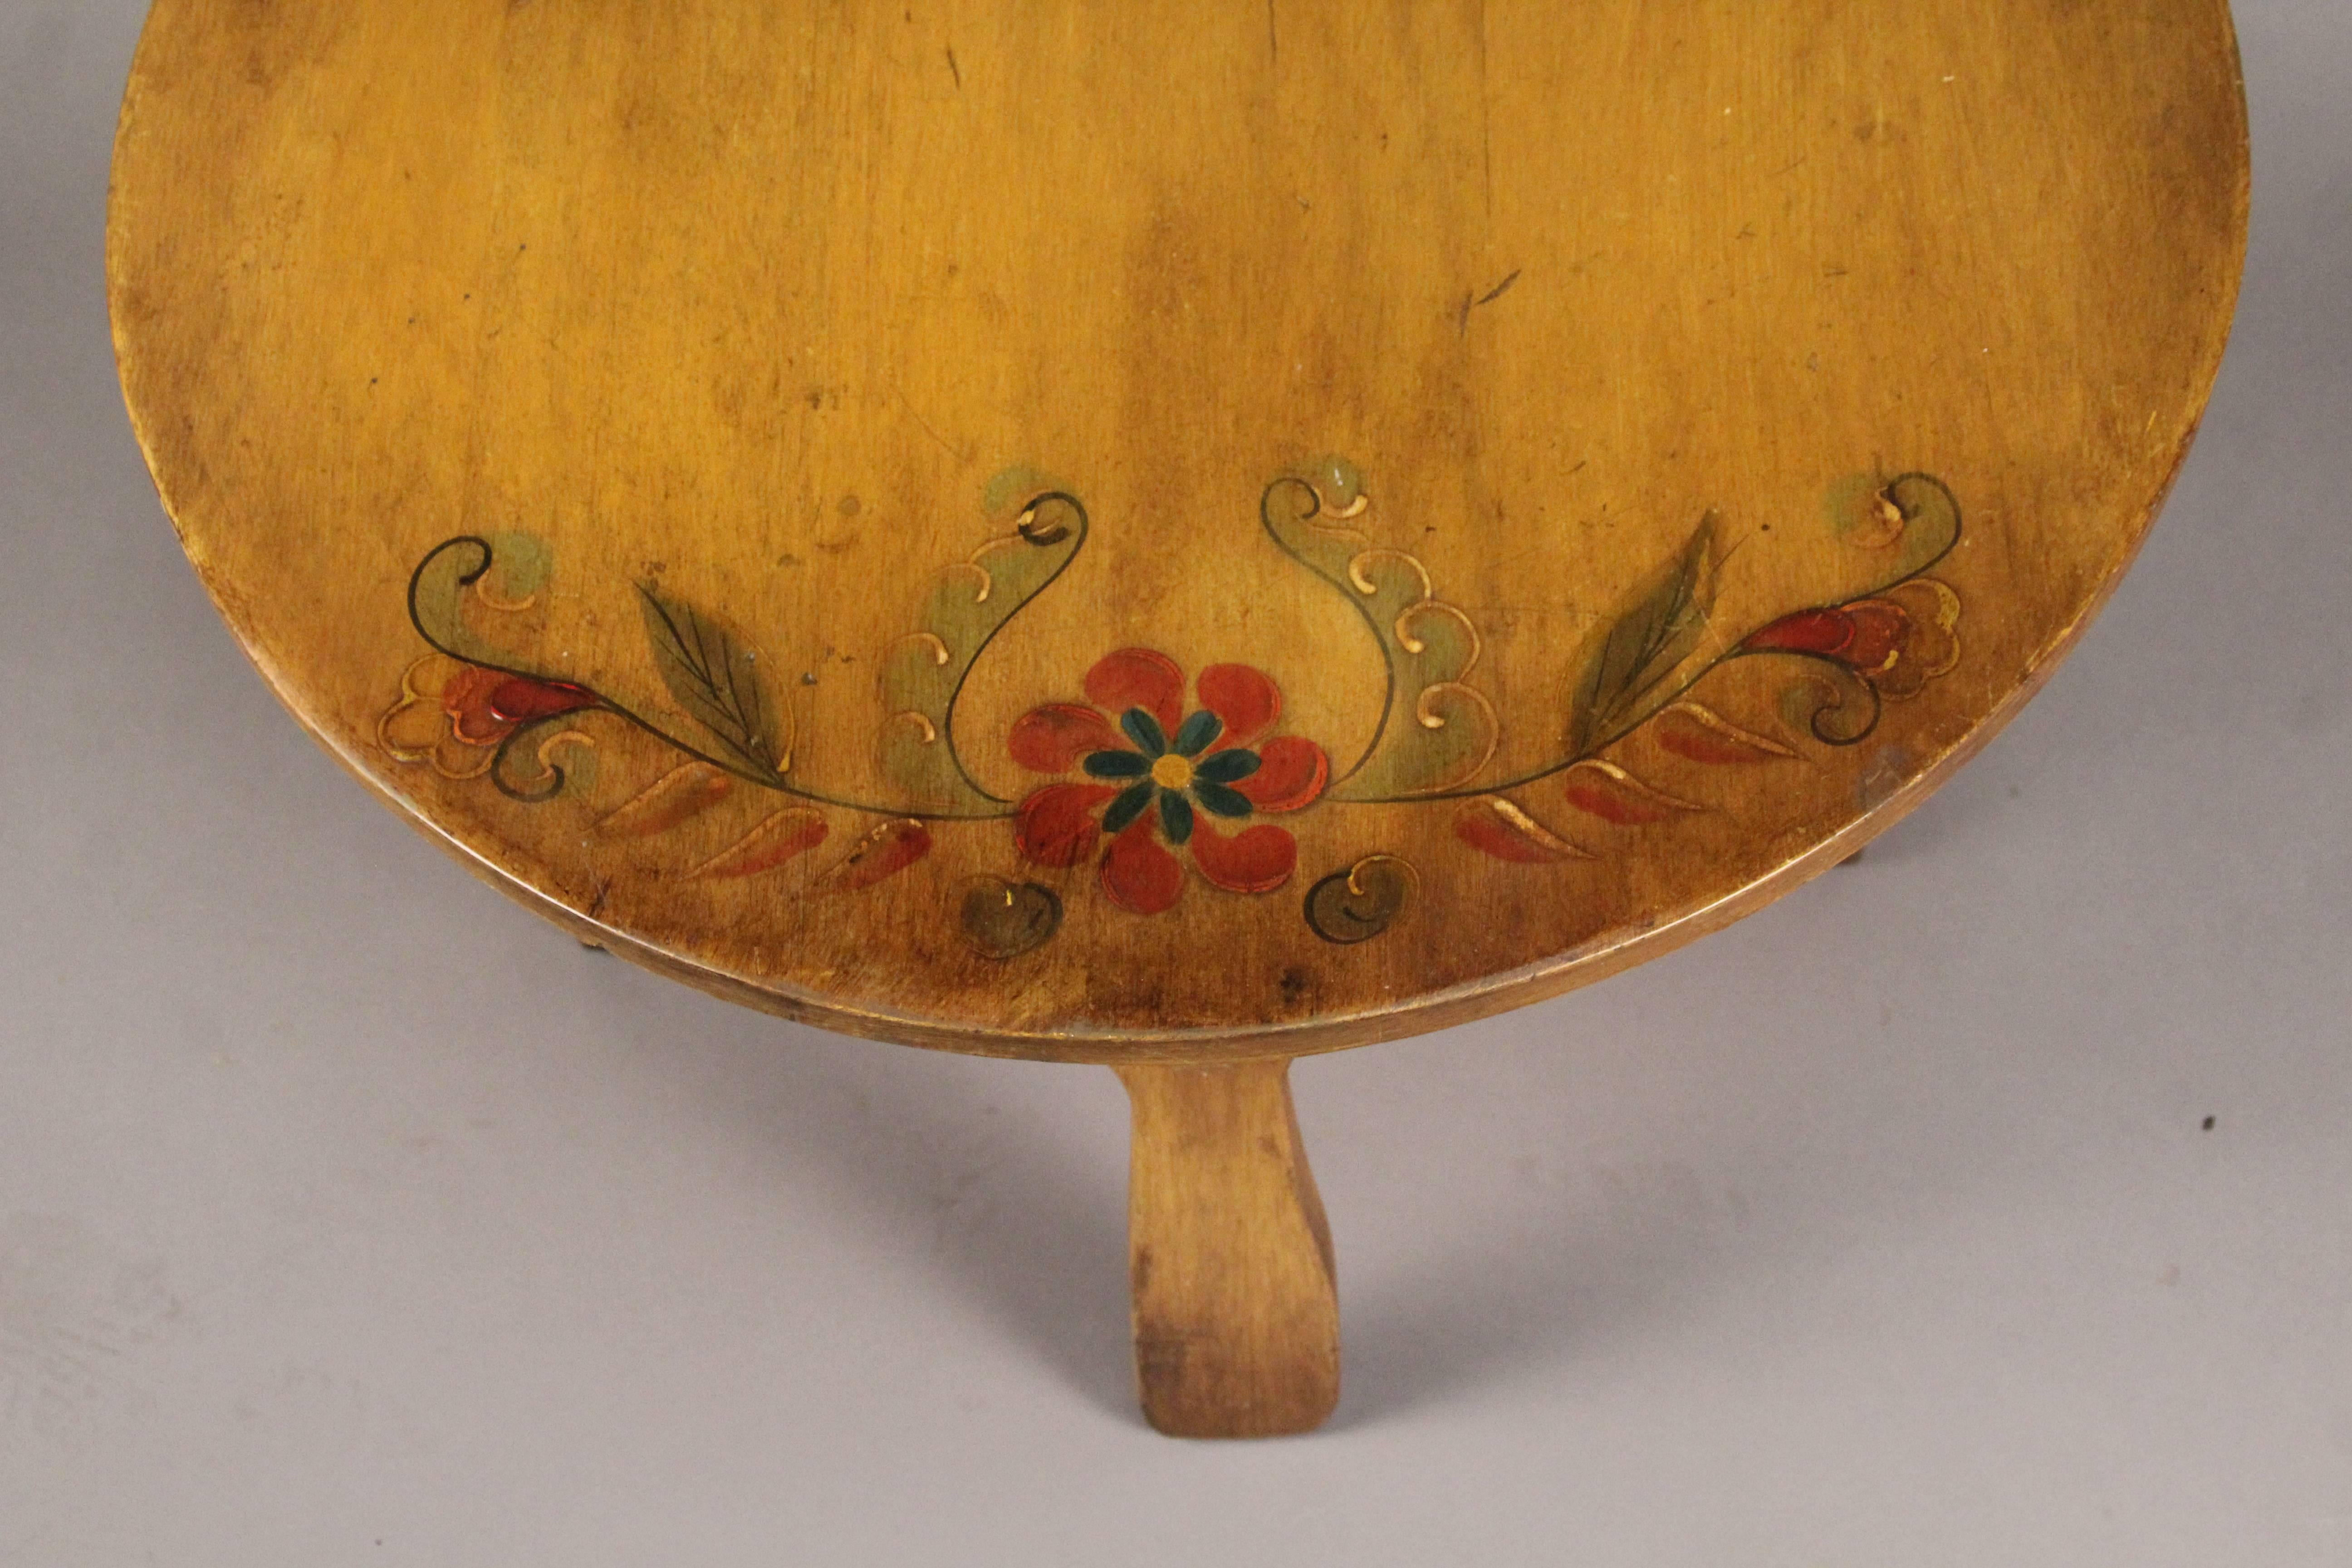 11204. Coronado 1930s coffee table with original finish
Rancho period coffee table with floral painting. Measure: 18.25